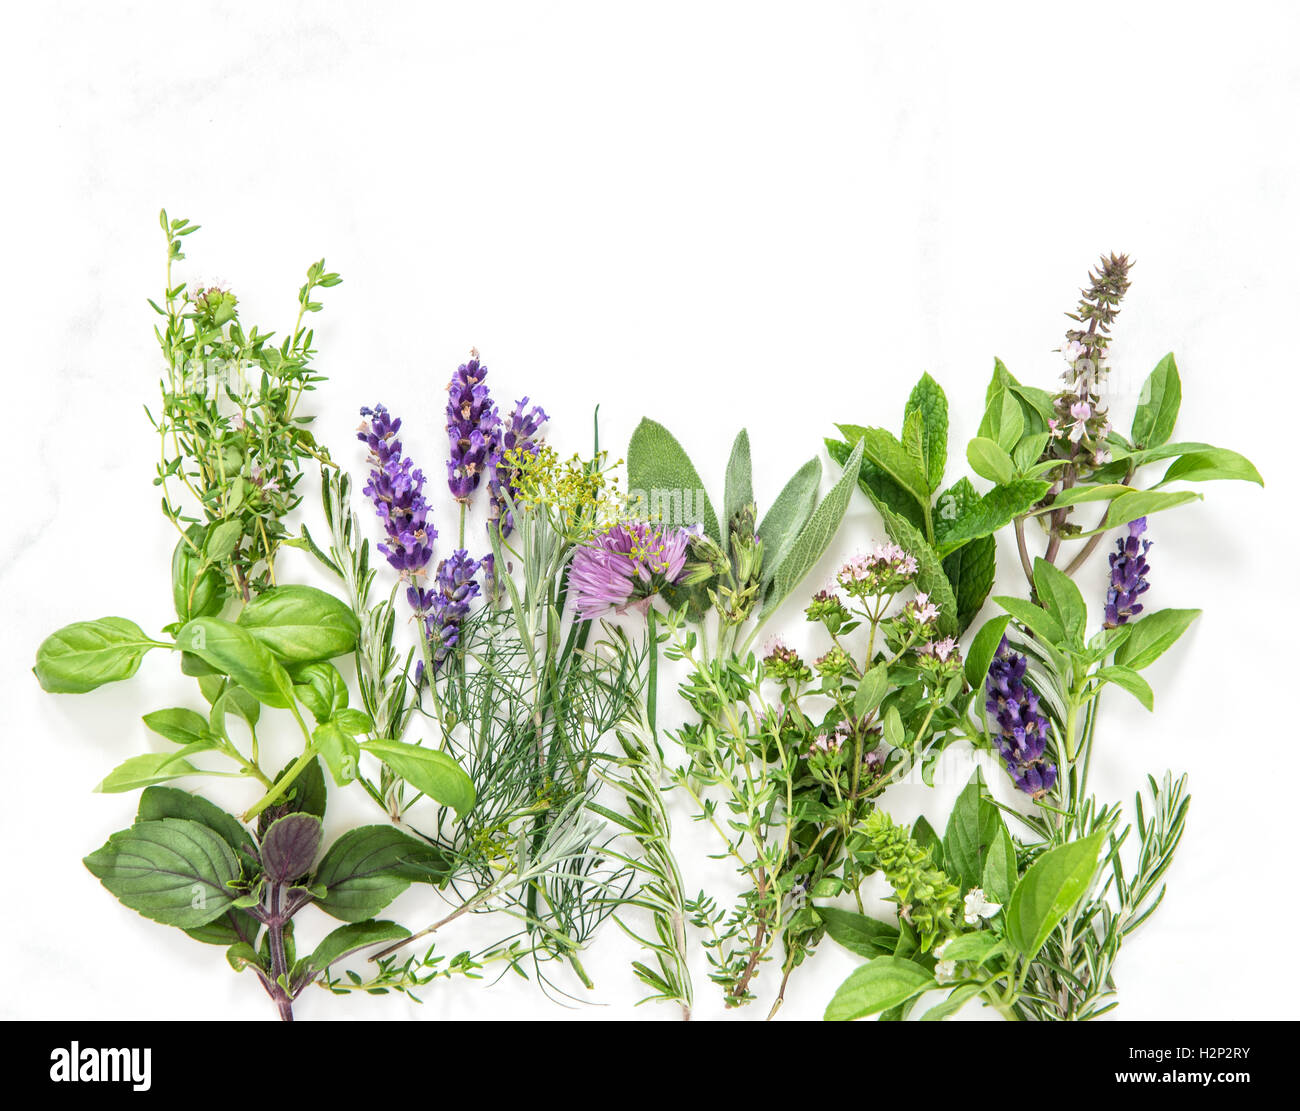 Fresh herbs on marble stone background. Basil, rosemary, sage, thyme, mint, dill, savory, lavender Food background Stock Photo